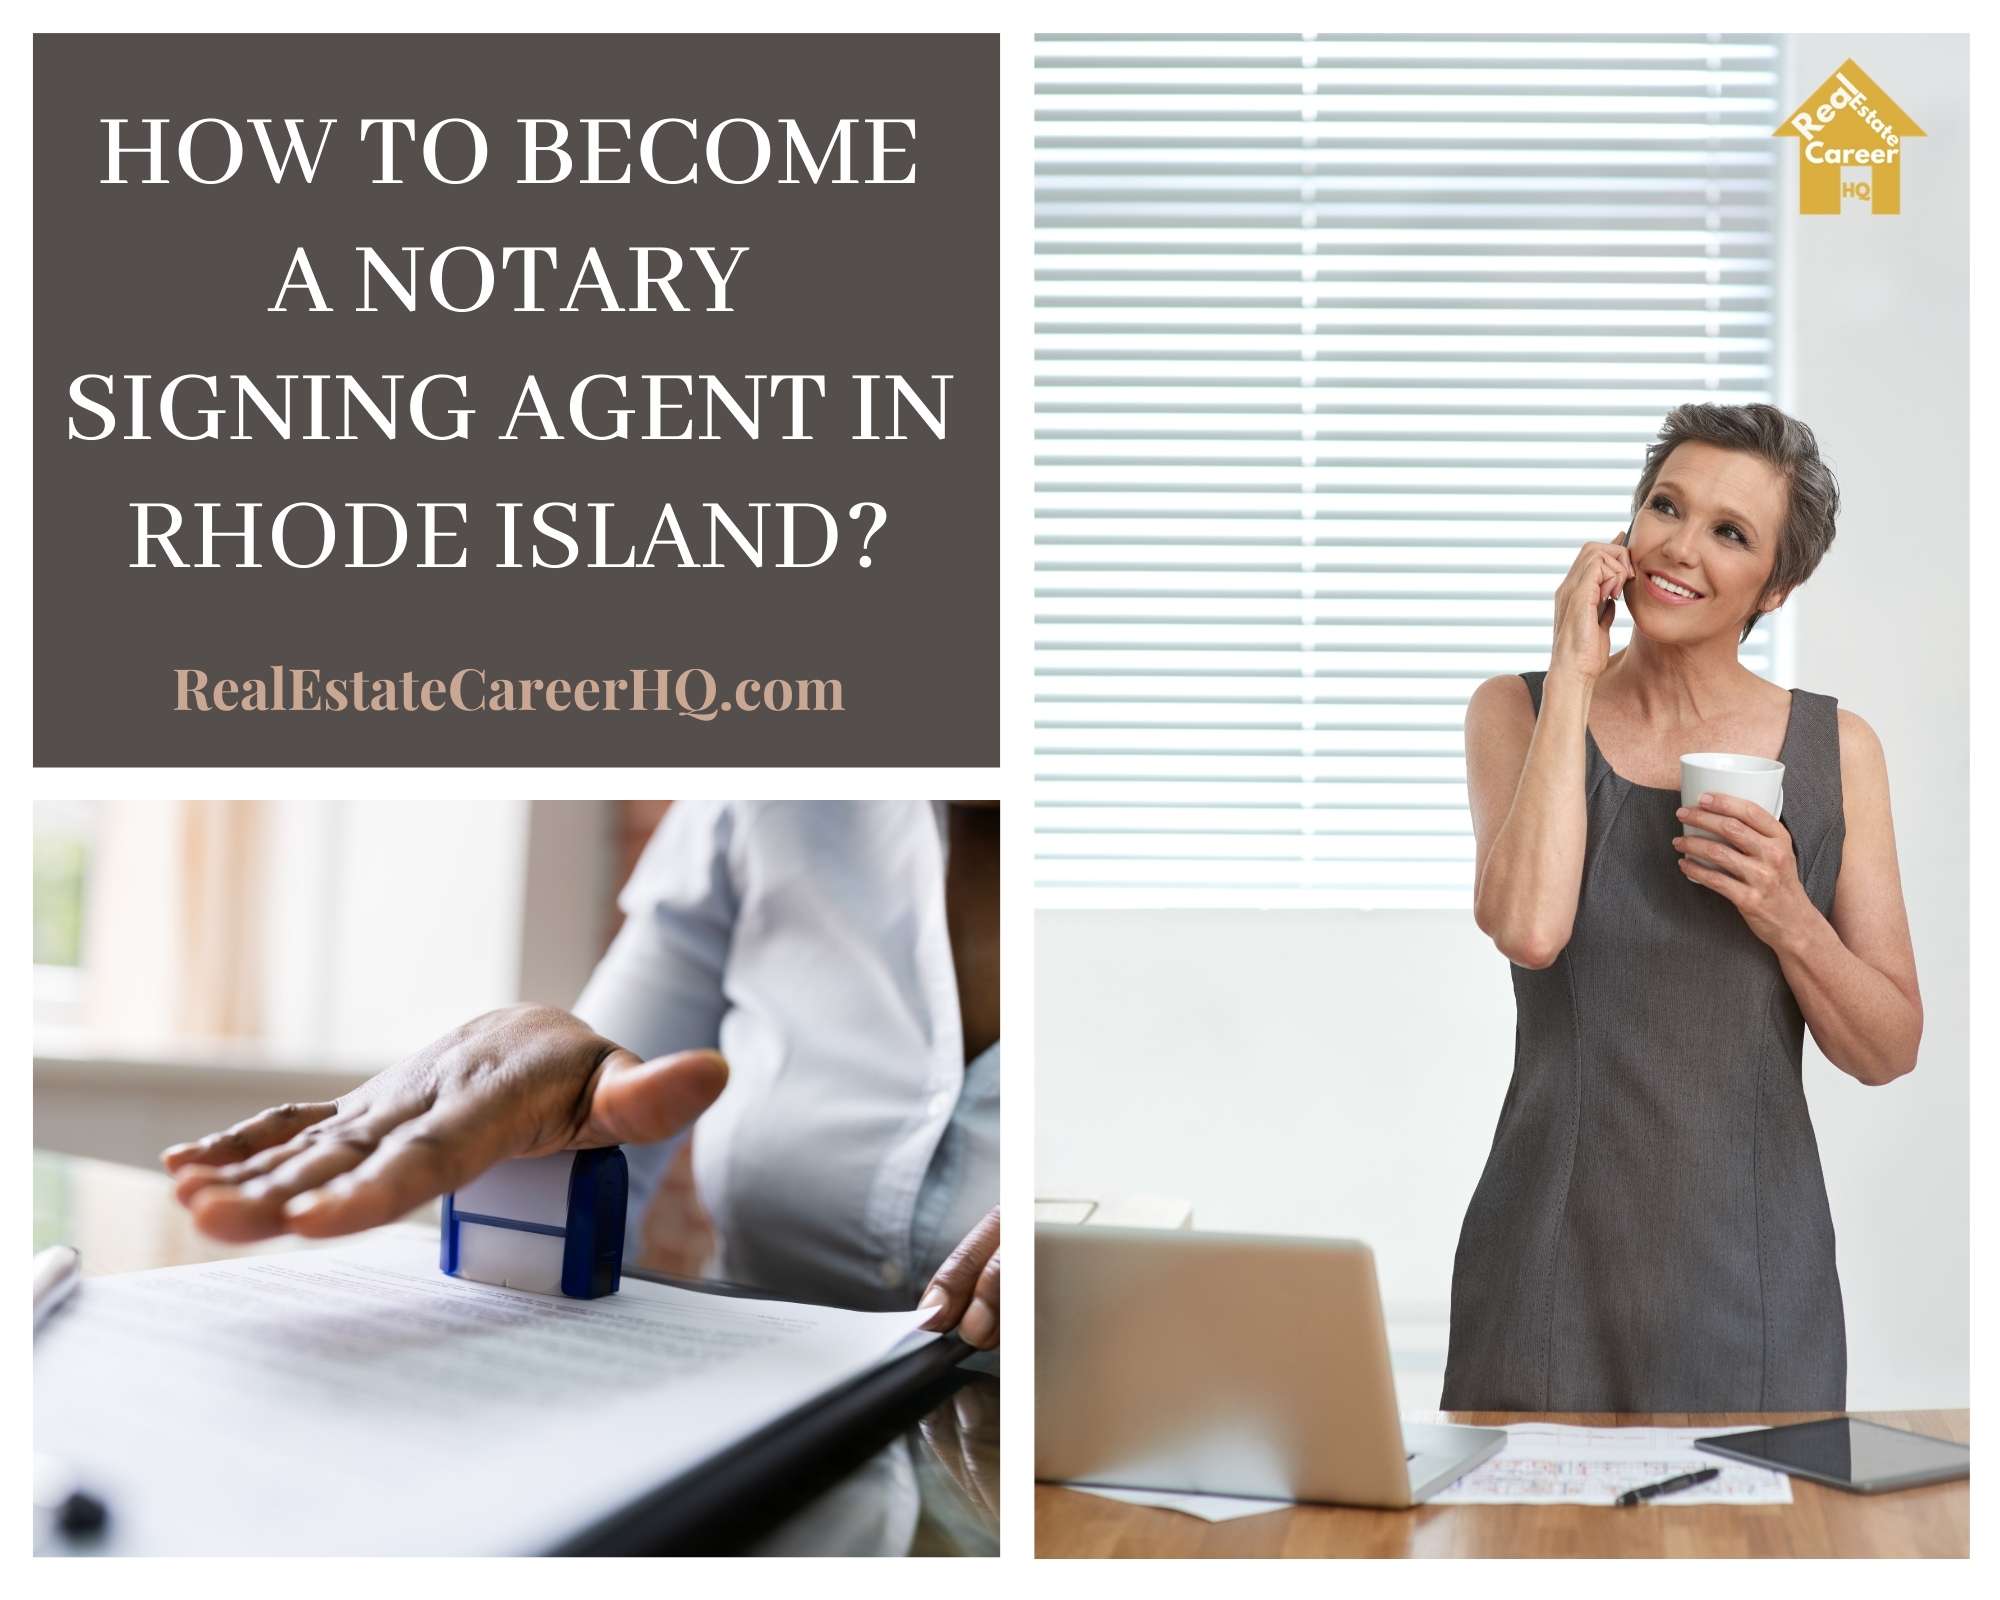 How to Become a Notary Signing Agent in Rhode Island